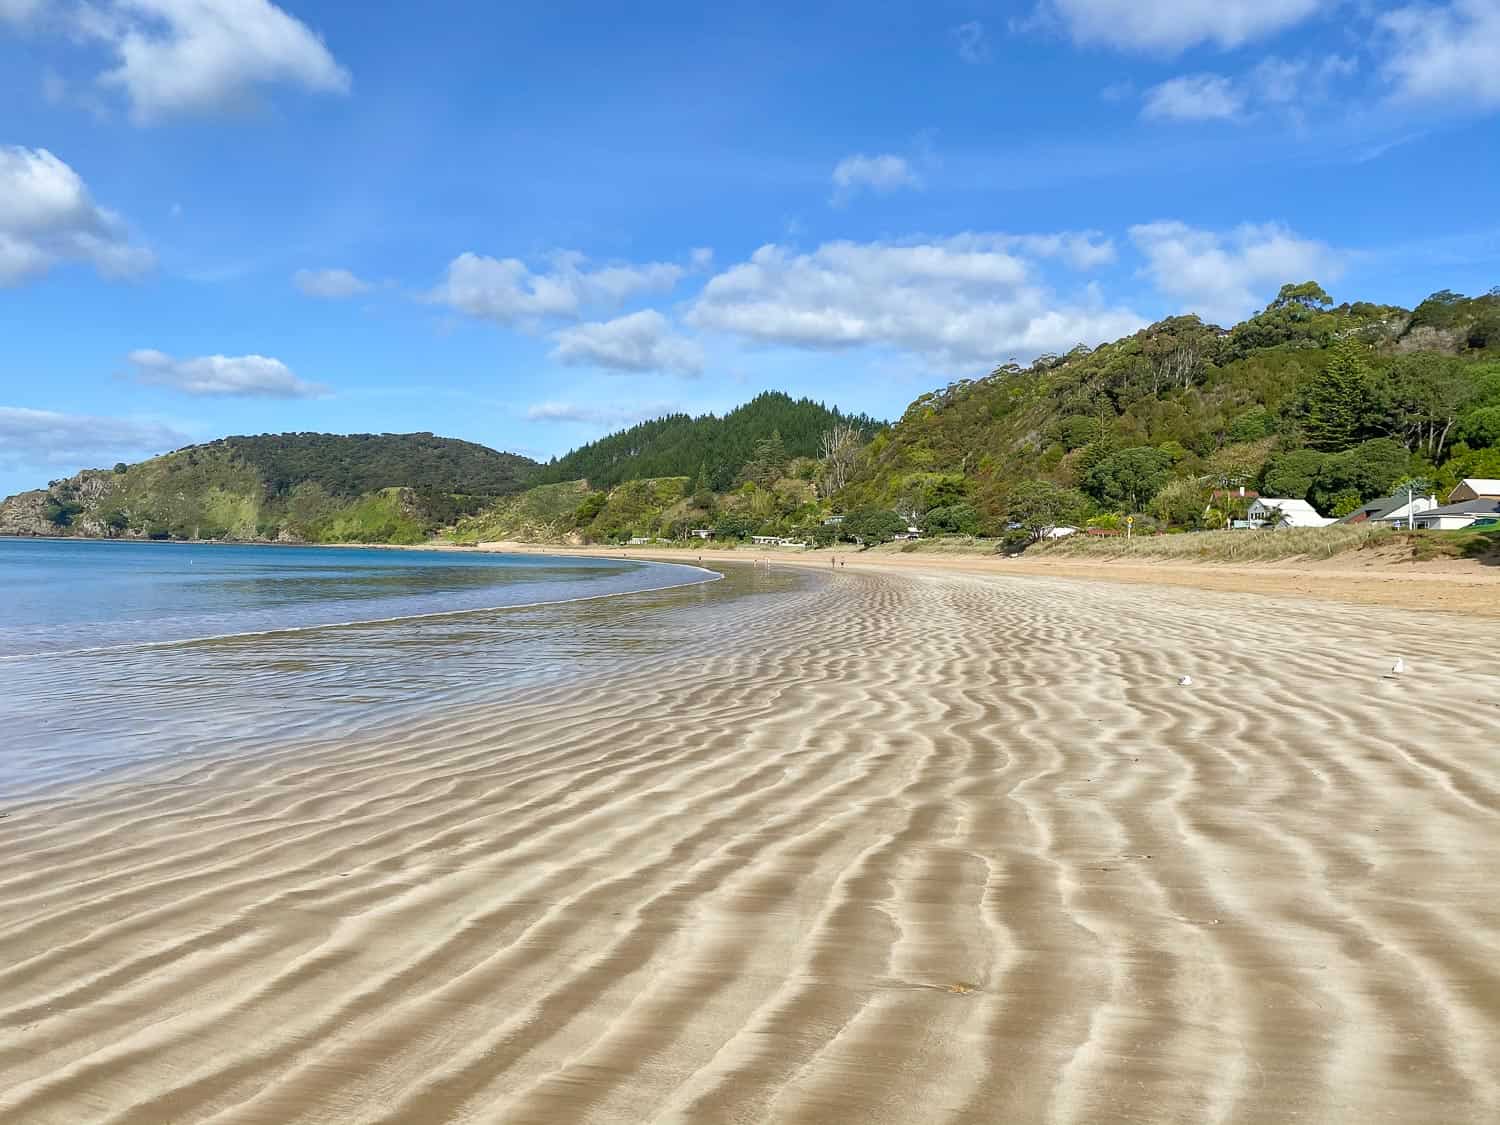 Long Beach near Russell in the Bay of Islands, New Zealand